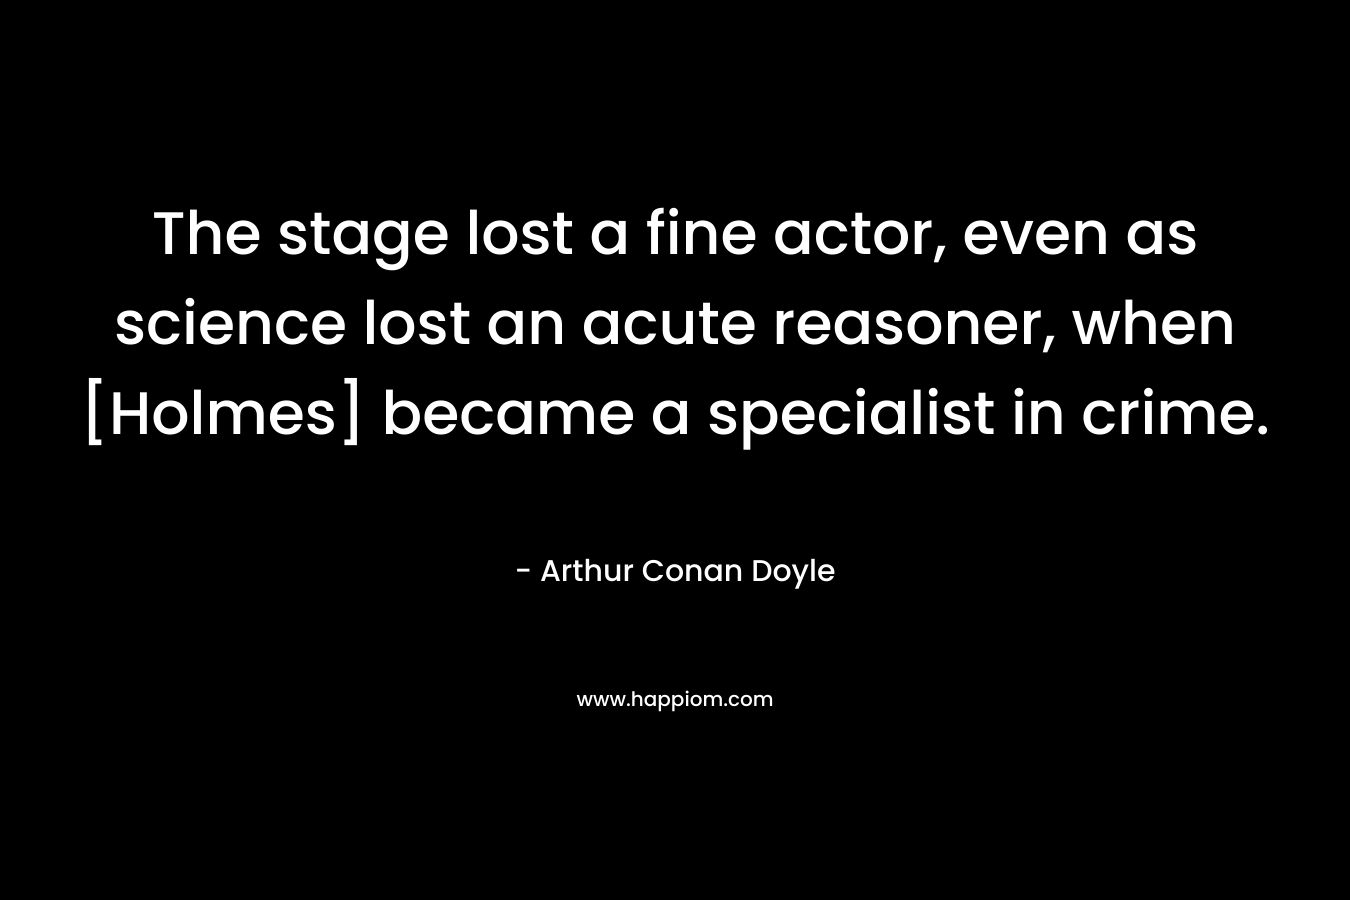 The stage lost a fine actor, even as science lost an acute reasoner, when [Holmes] became a specialist in crime. – Arthur Conan Doyle